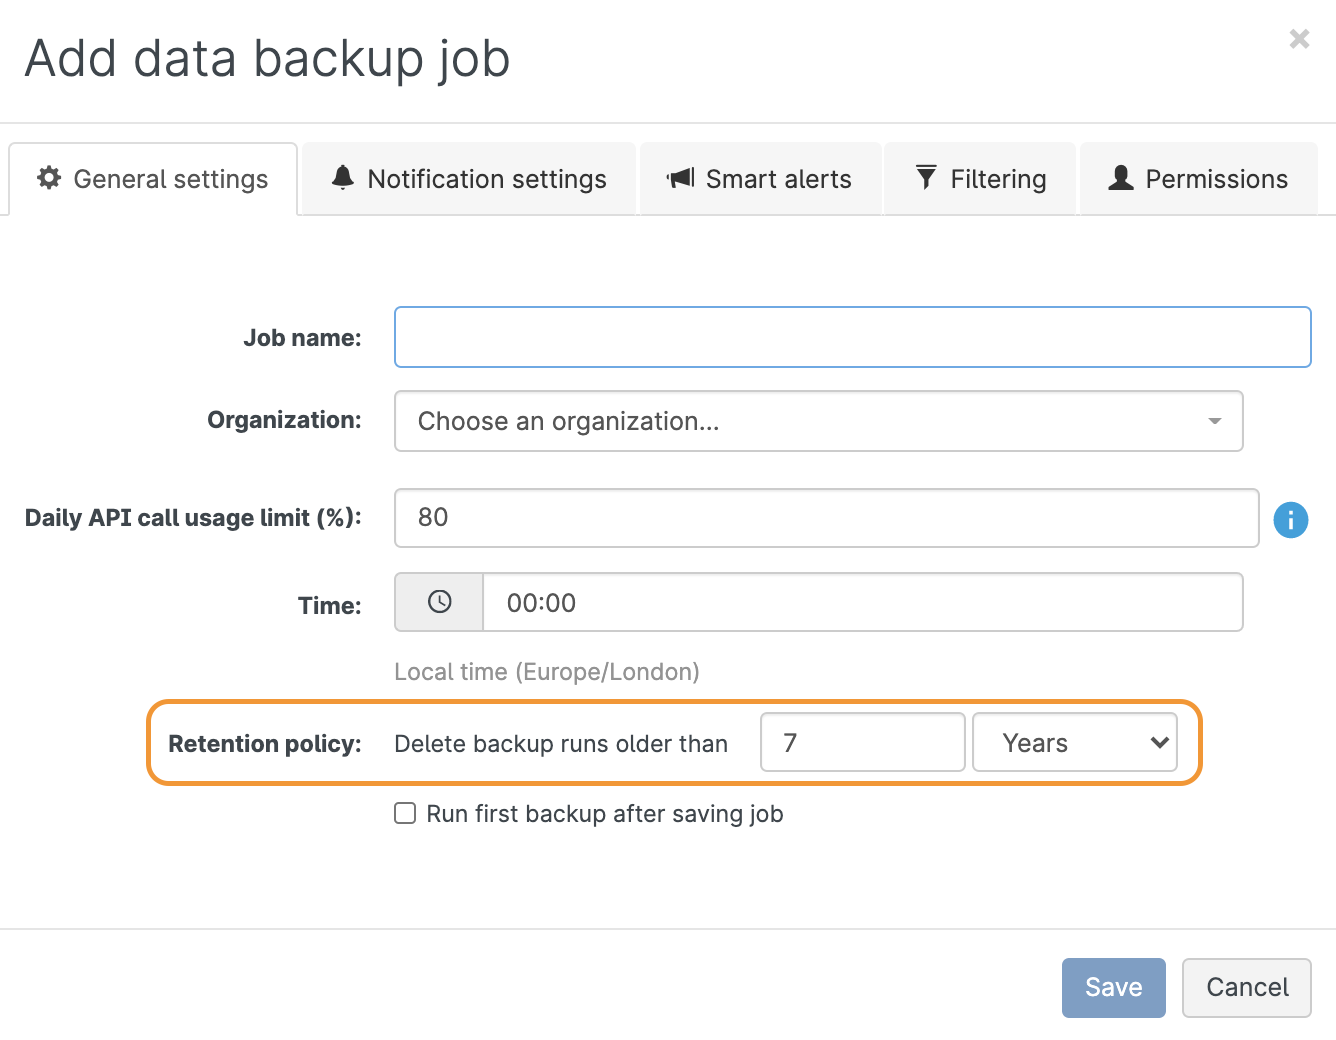 Gearset's UI for creating a backup job